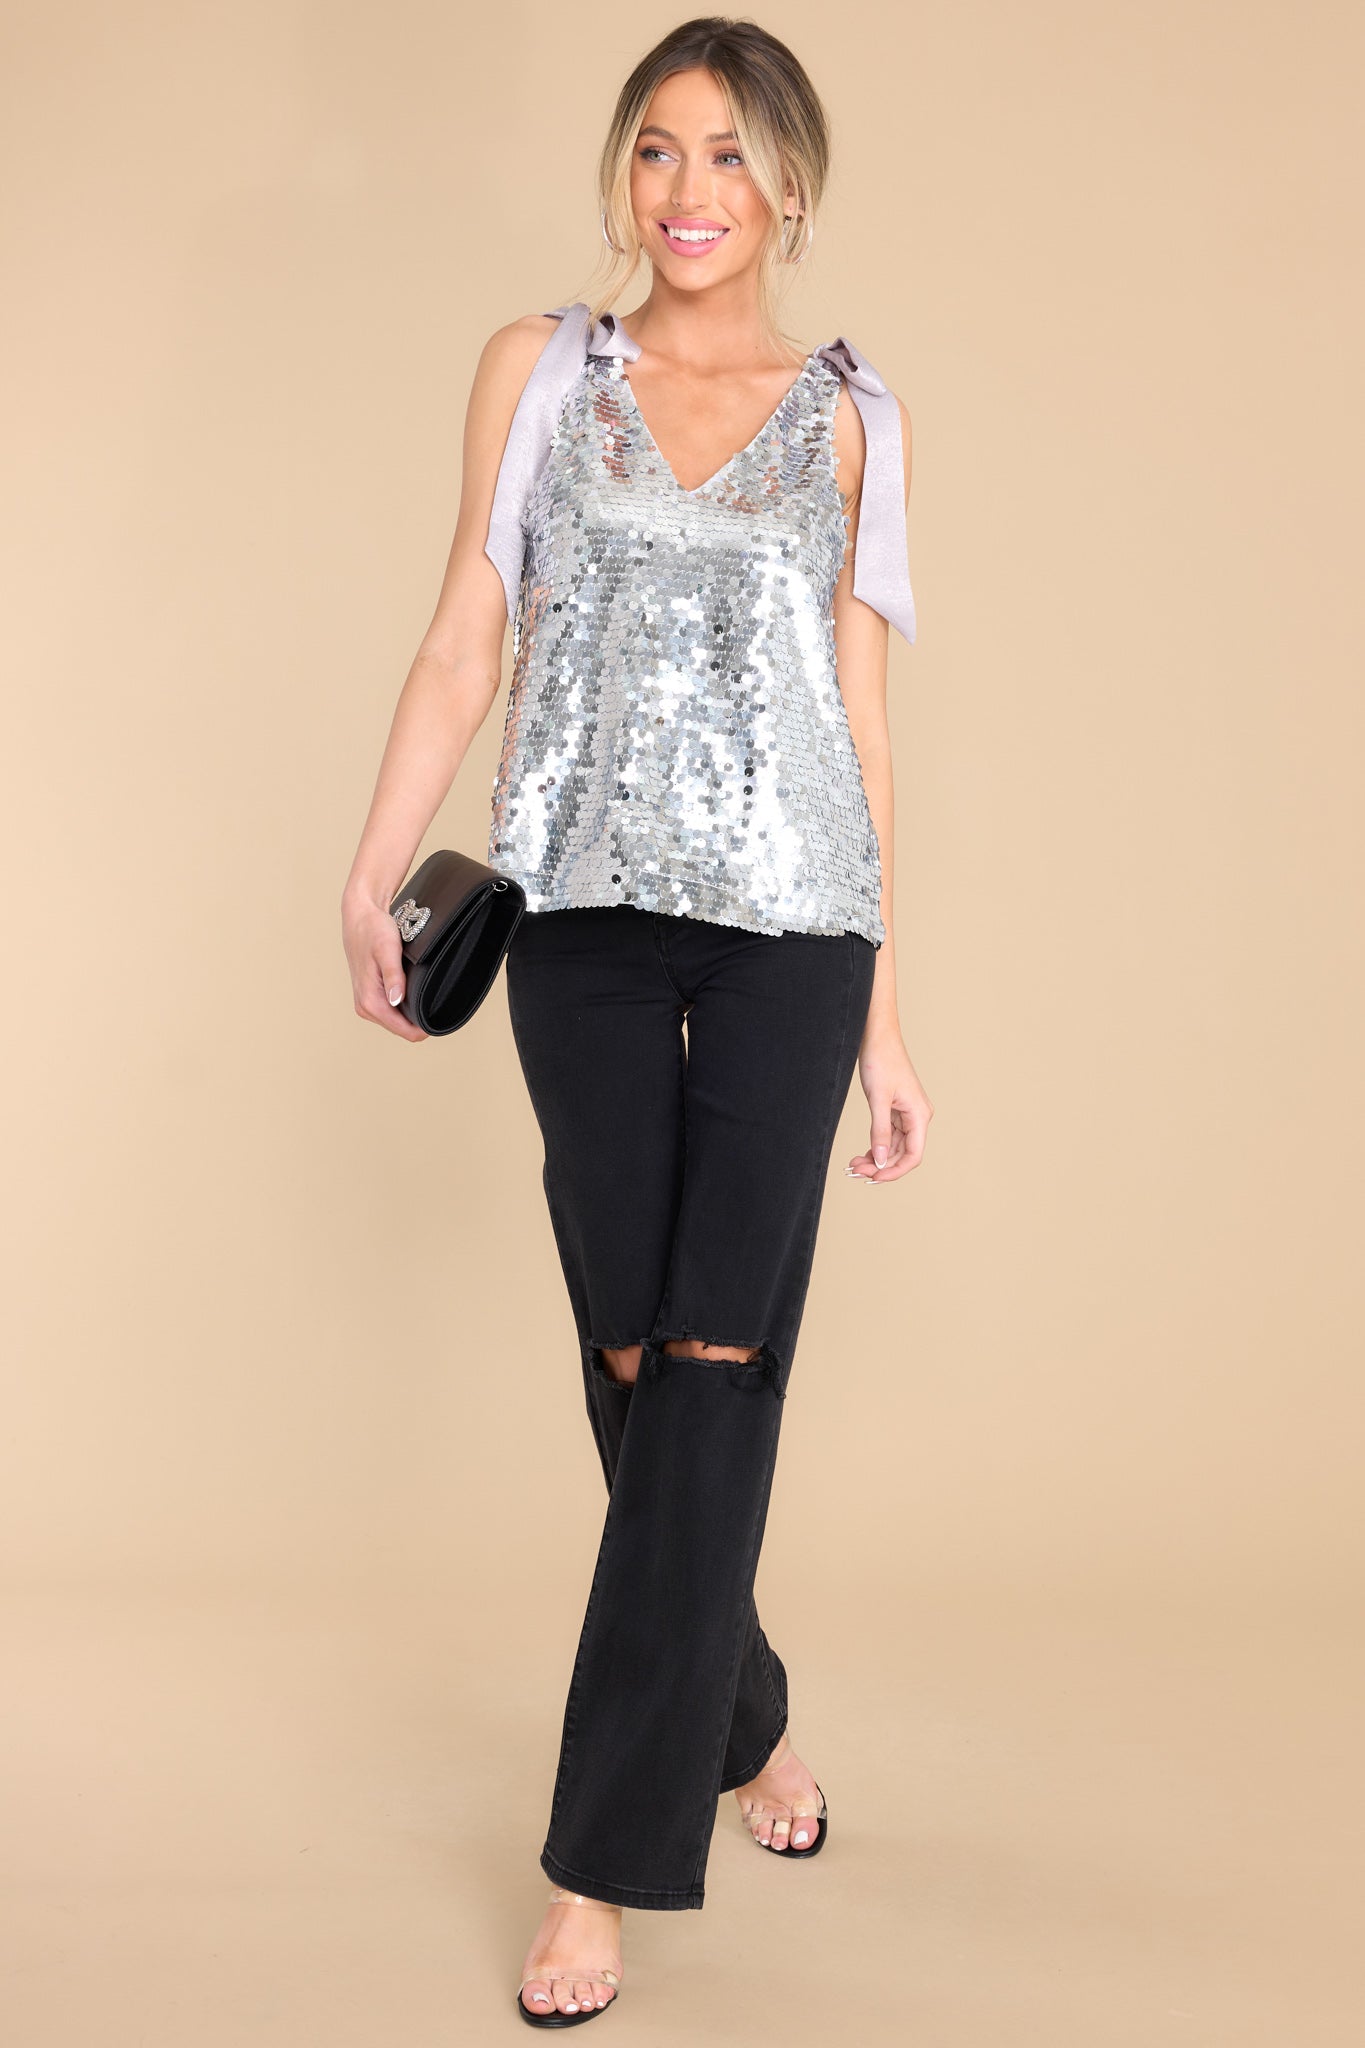 Midnight Kiss Silver Sequin Top - Red Dress